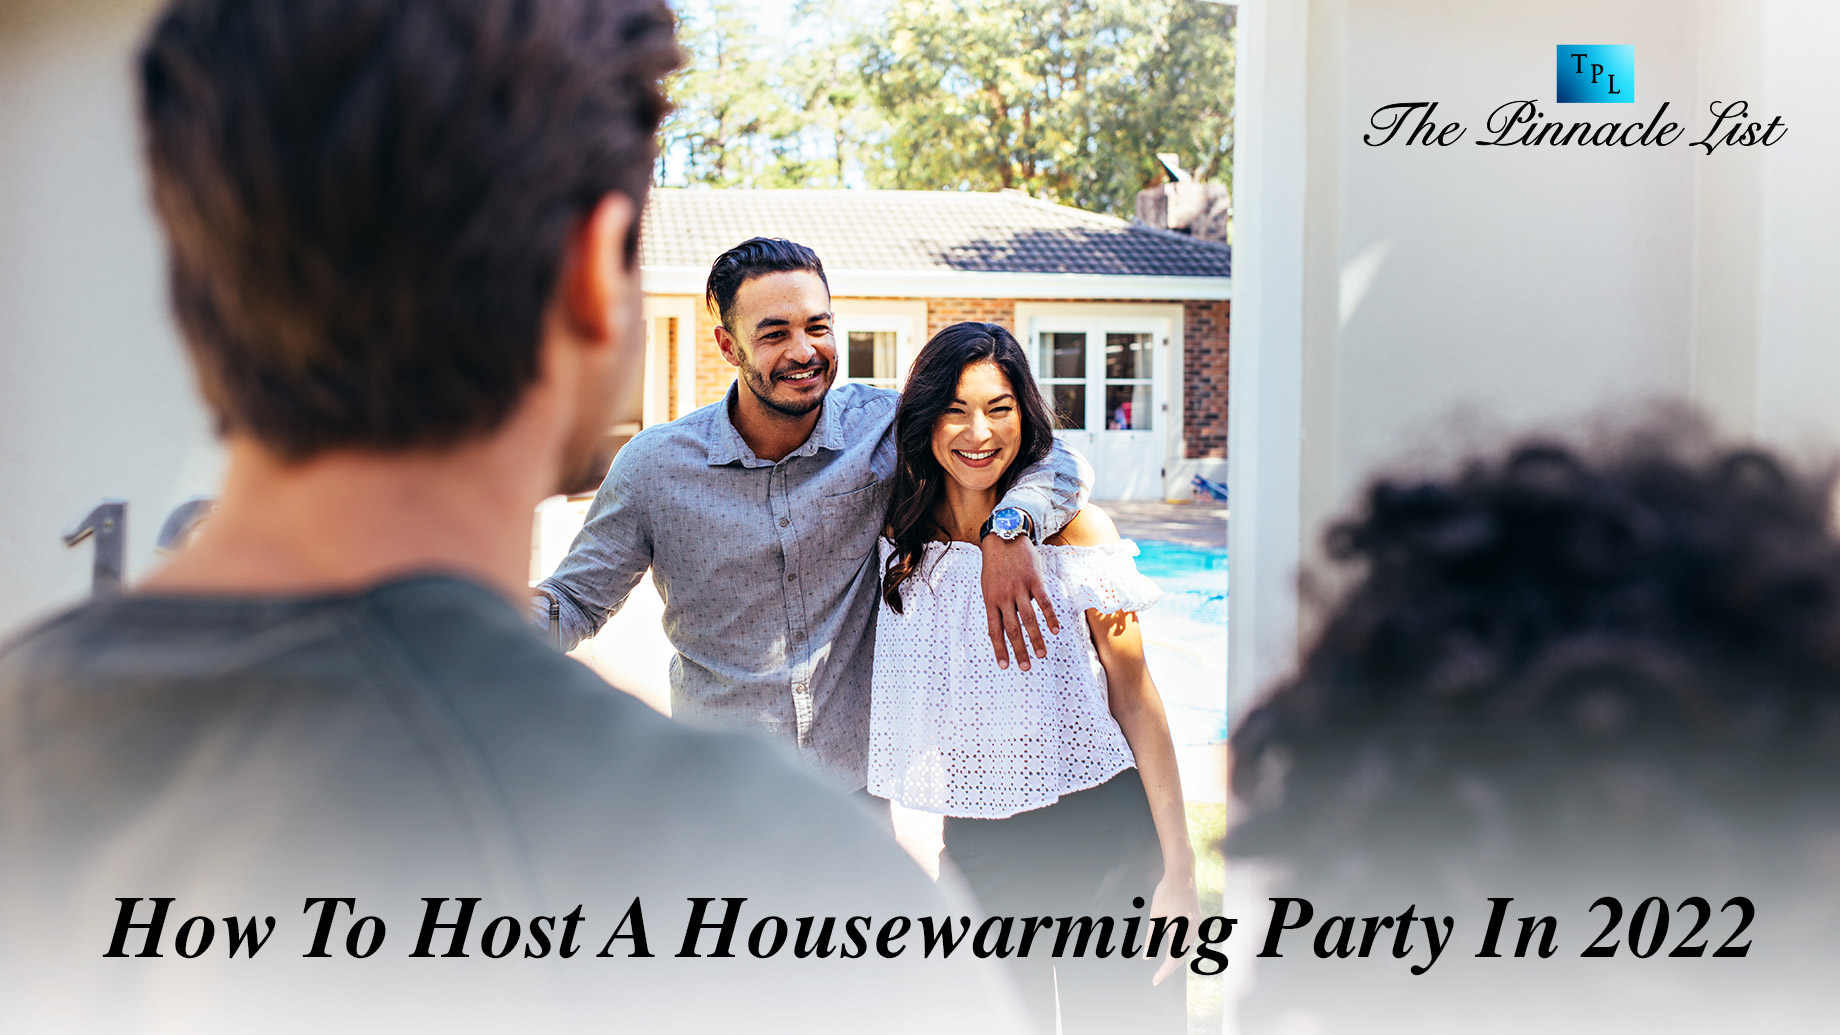 How To Host A Housewarming Party In 2022